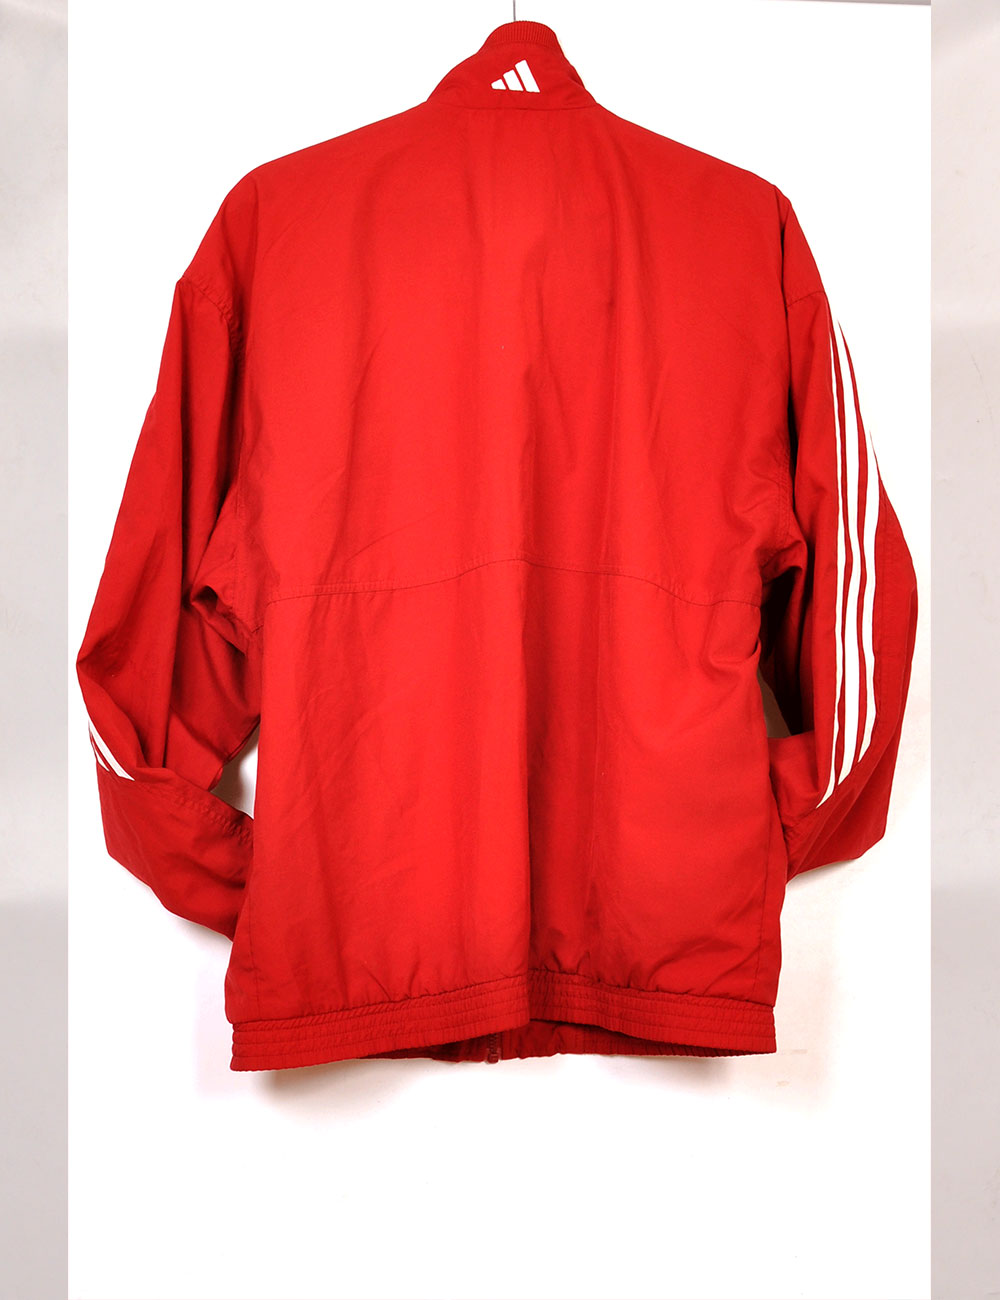 Adidas Light Jacket In Red